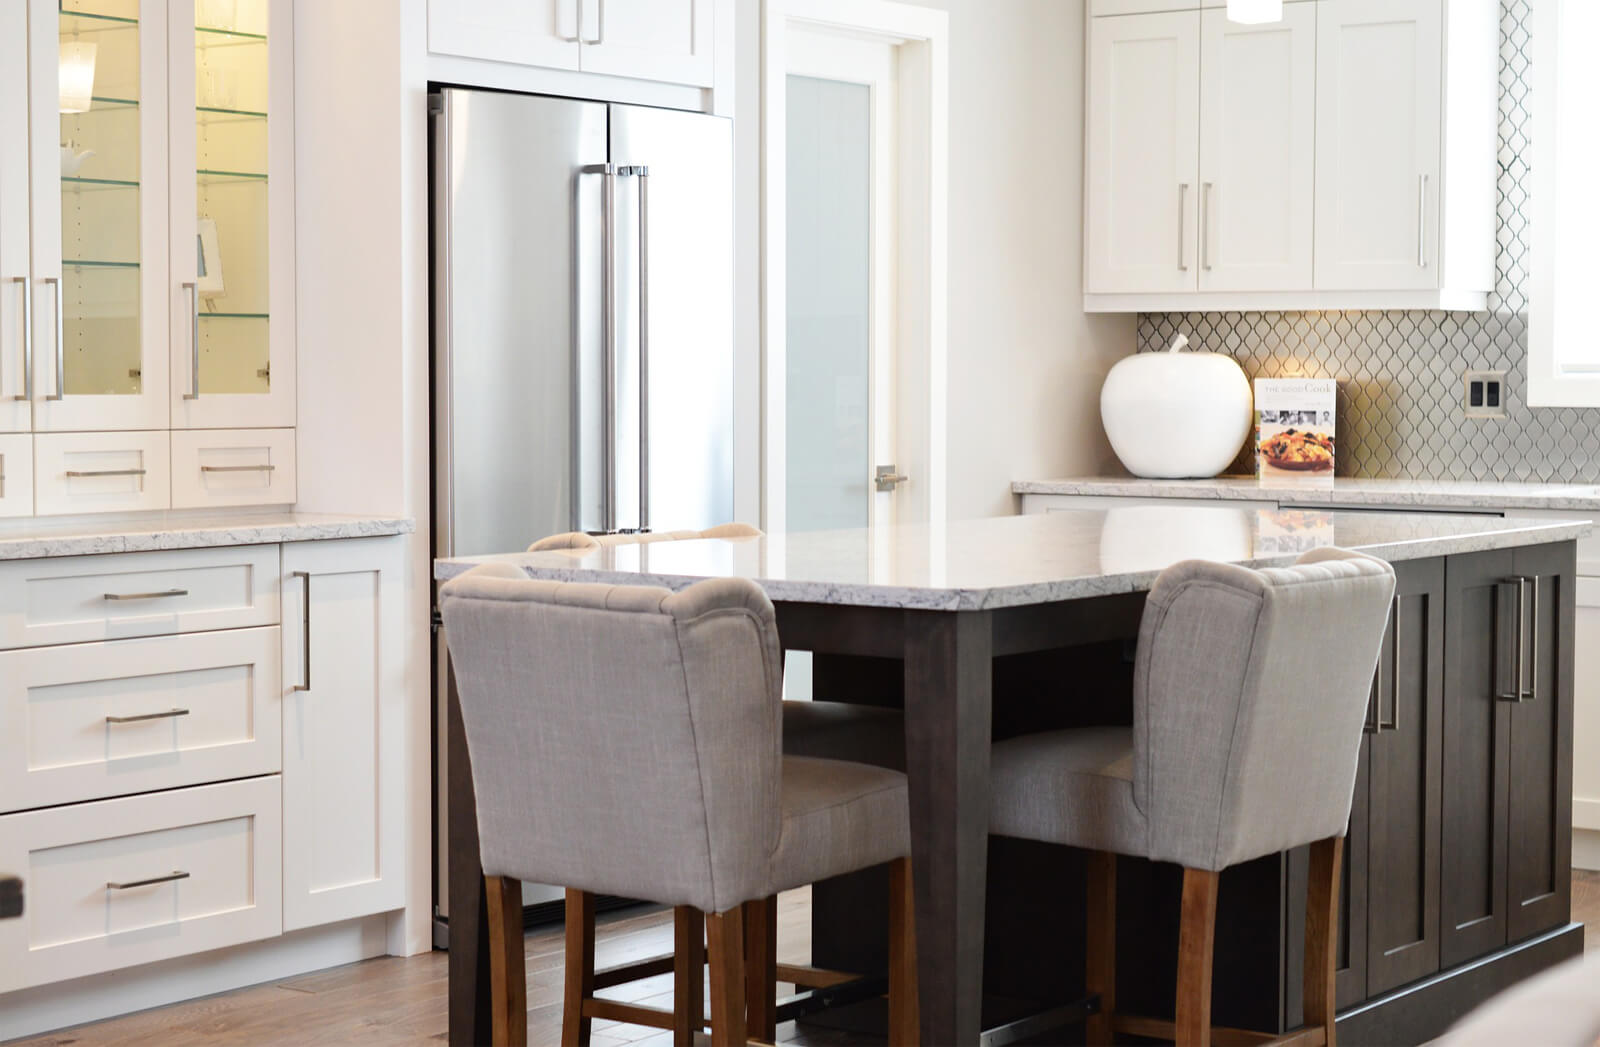 5 Things You Should Know About Kitchen Cabinets